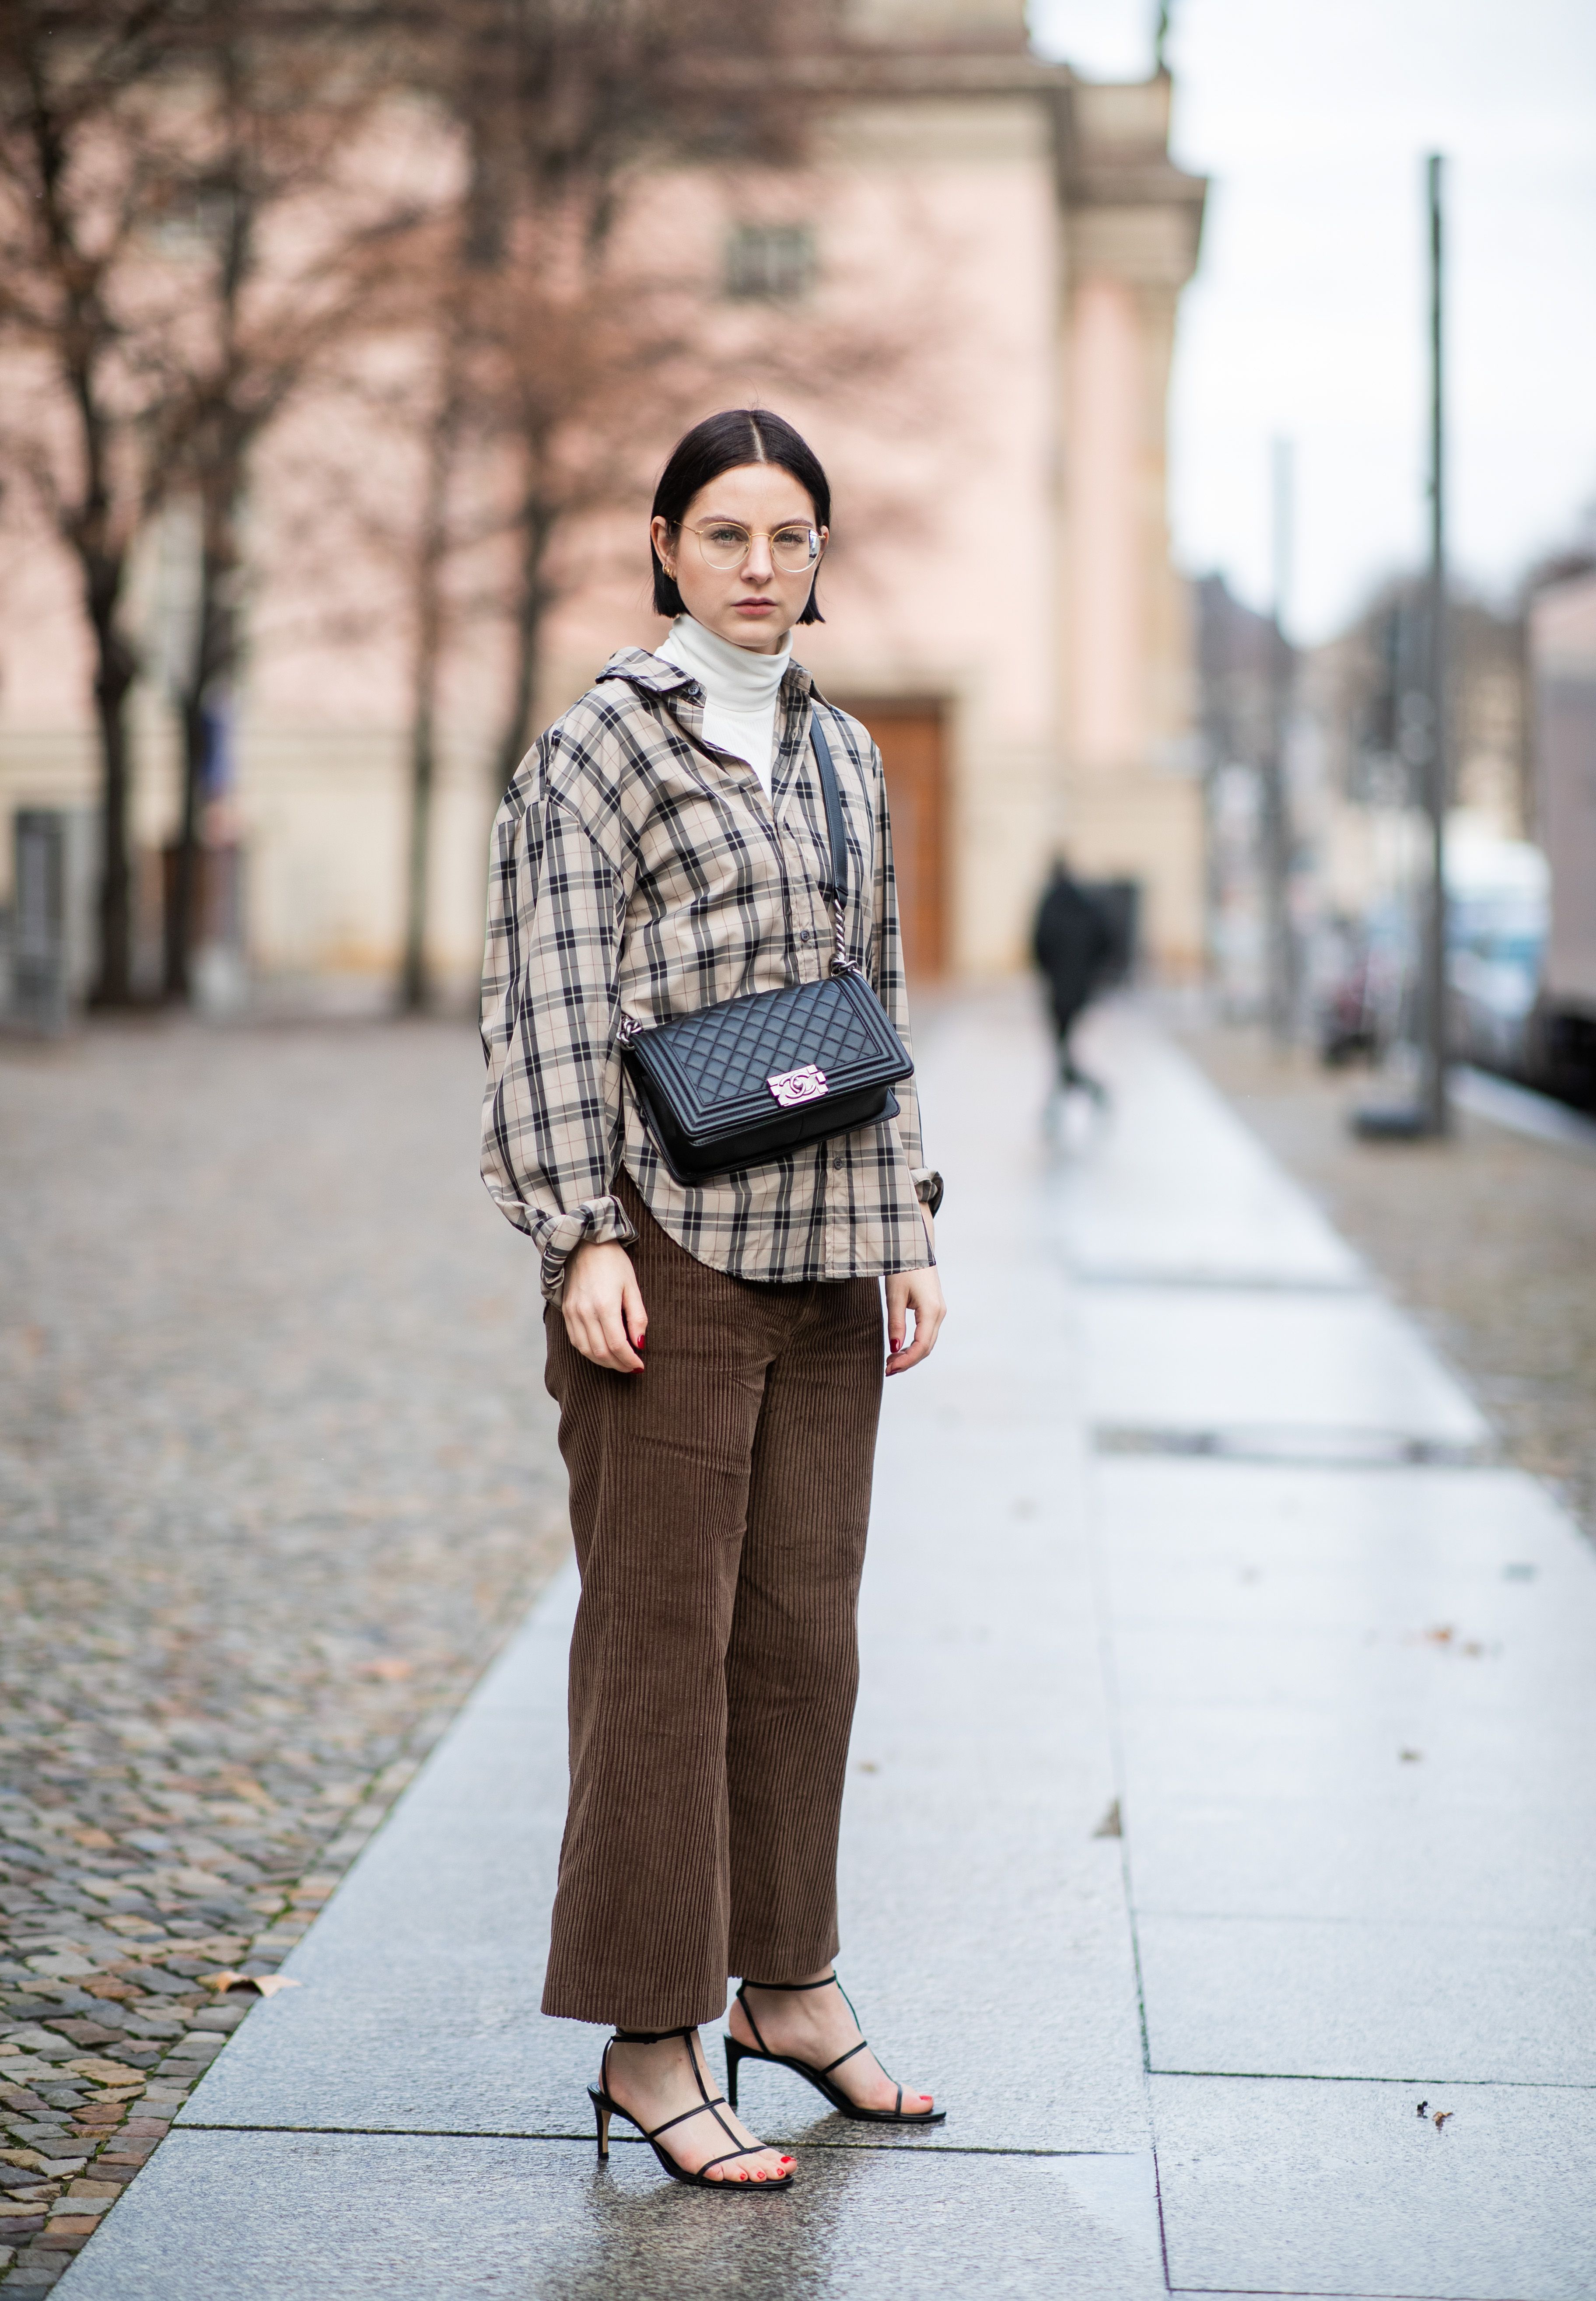 How To Wear A Flannel Shirt: 15 Styling Ideas For Women